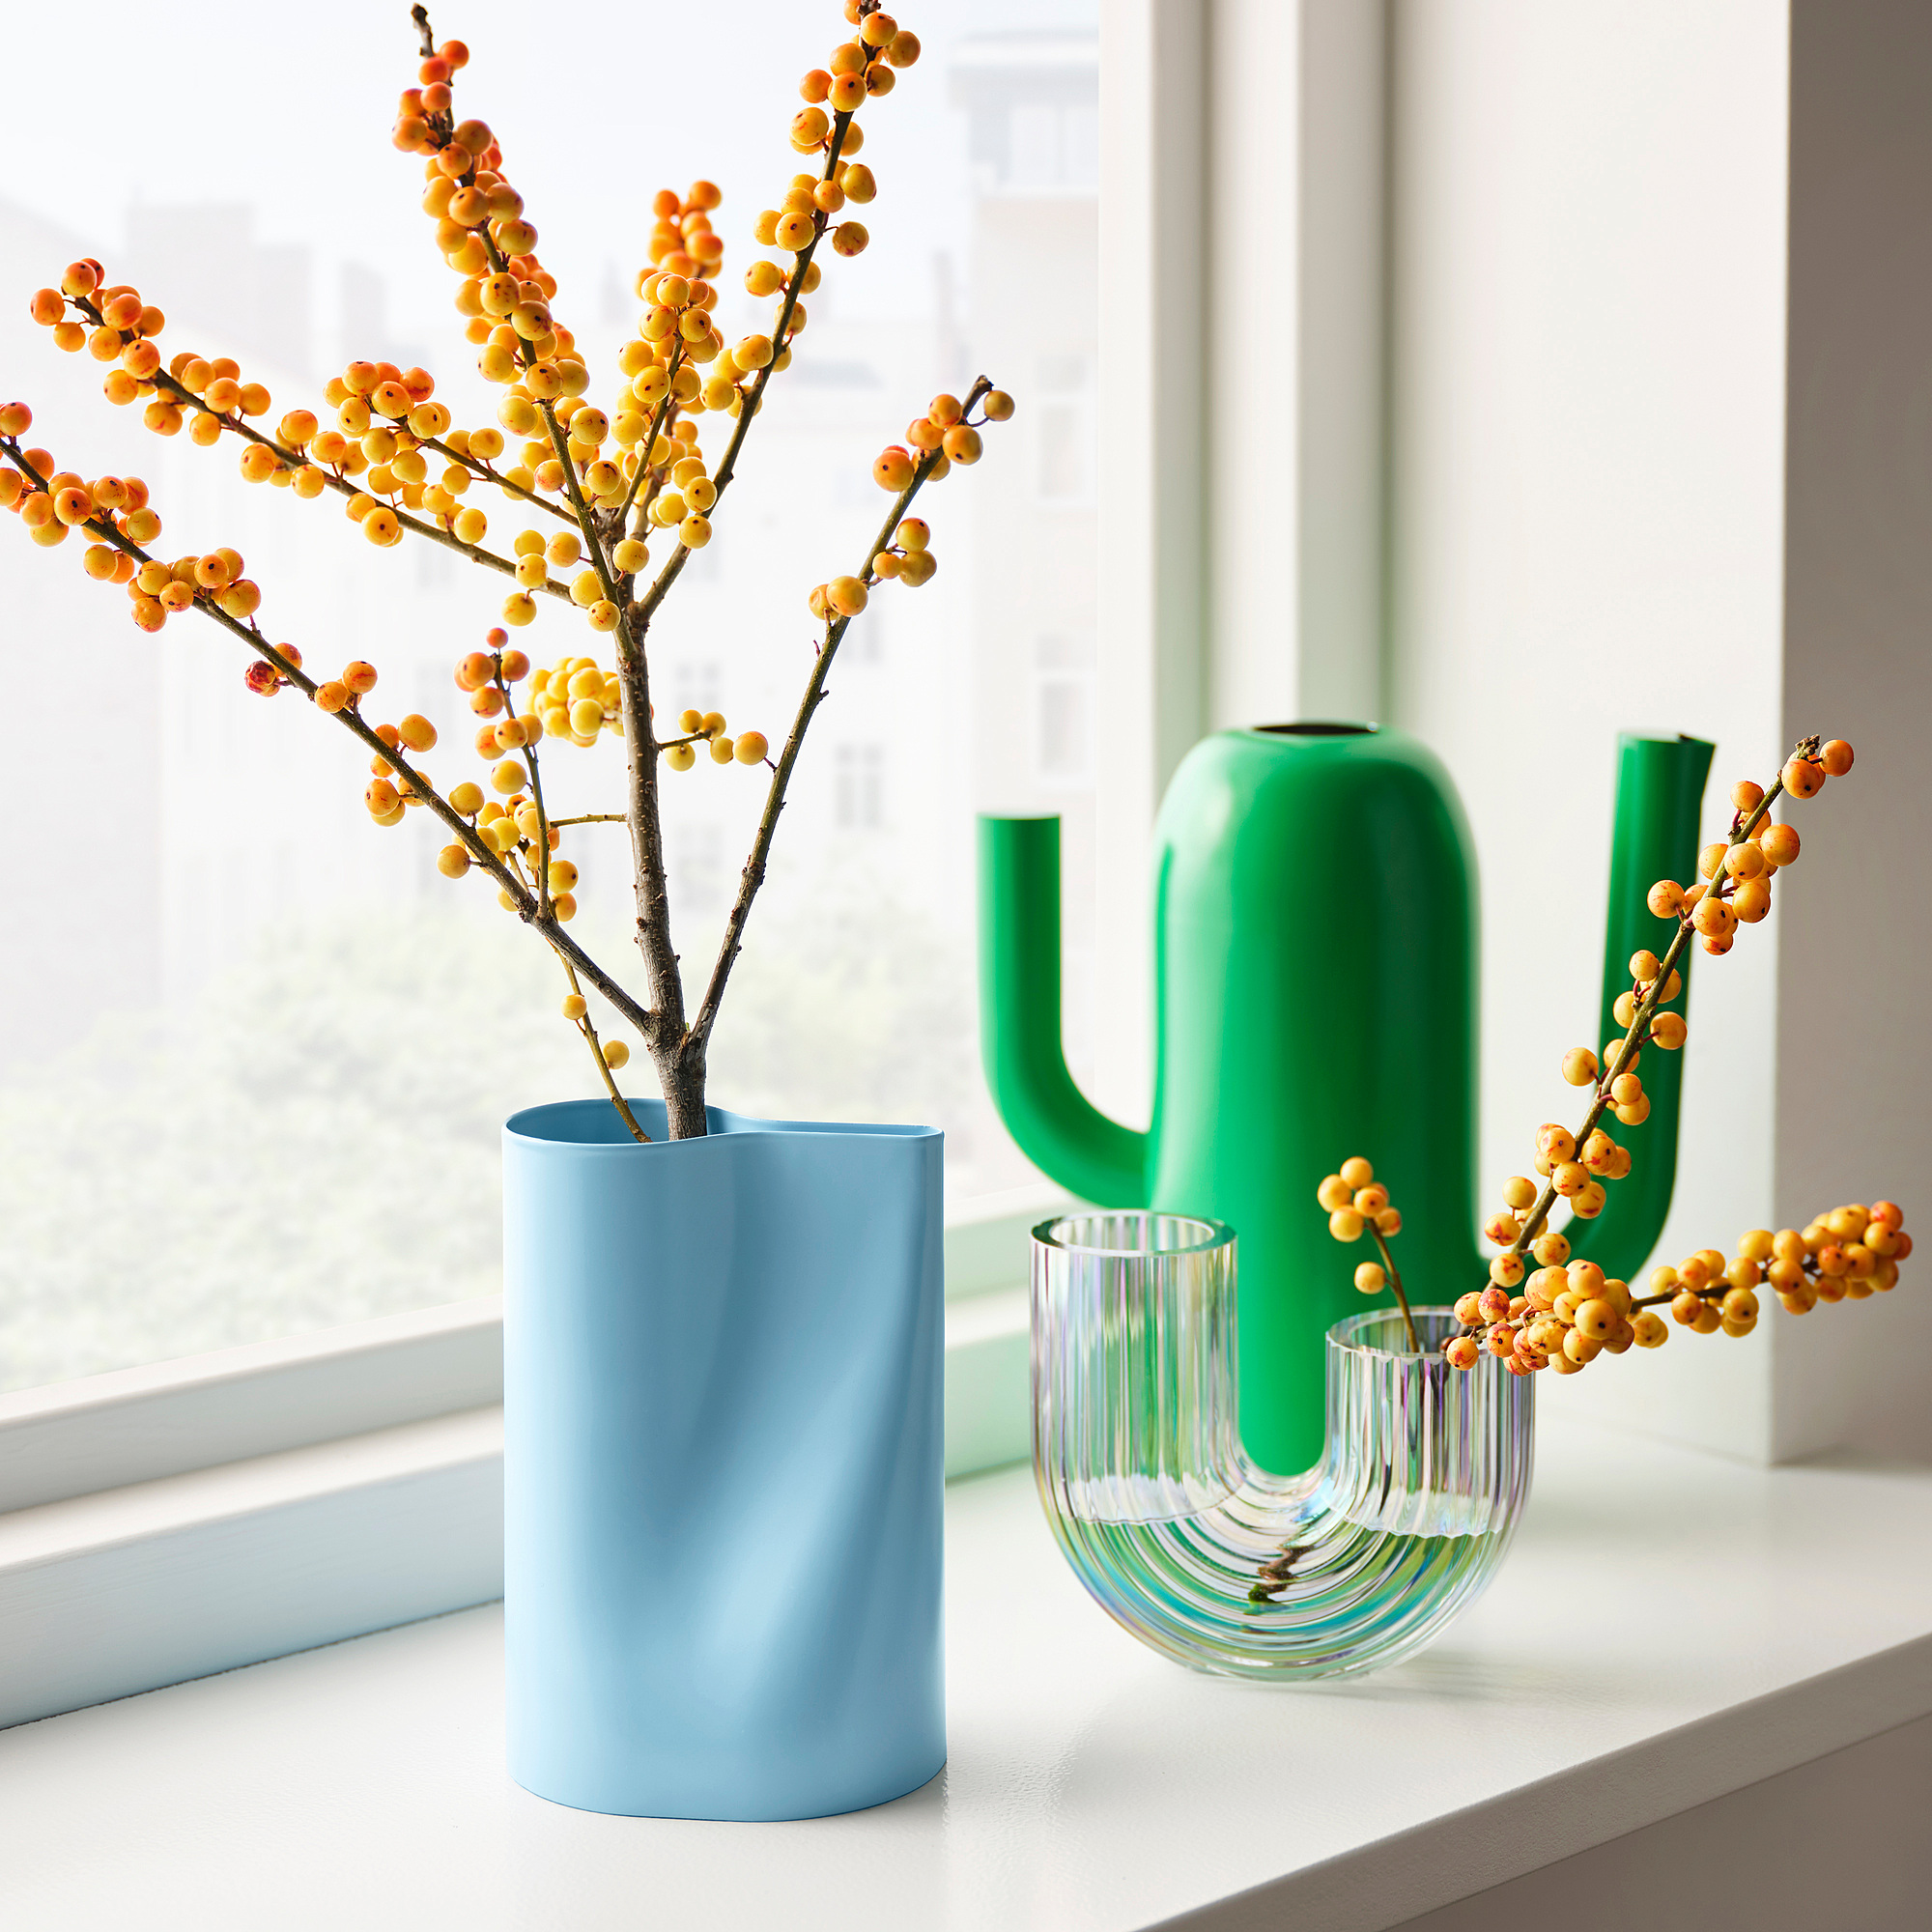 CHILIFRUKT vase/watering can